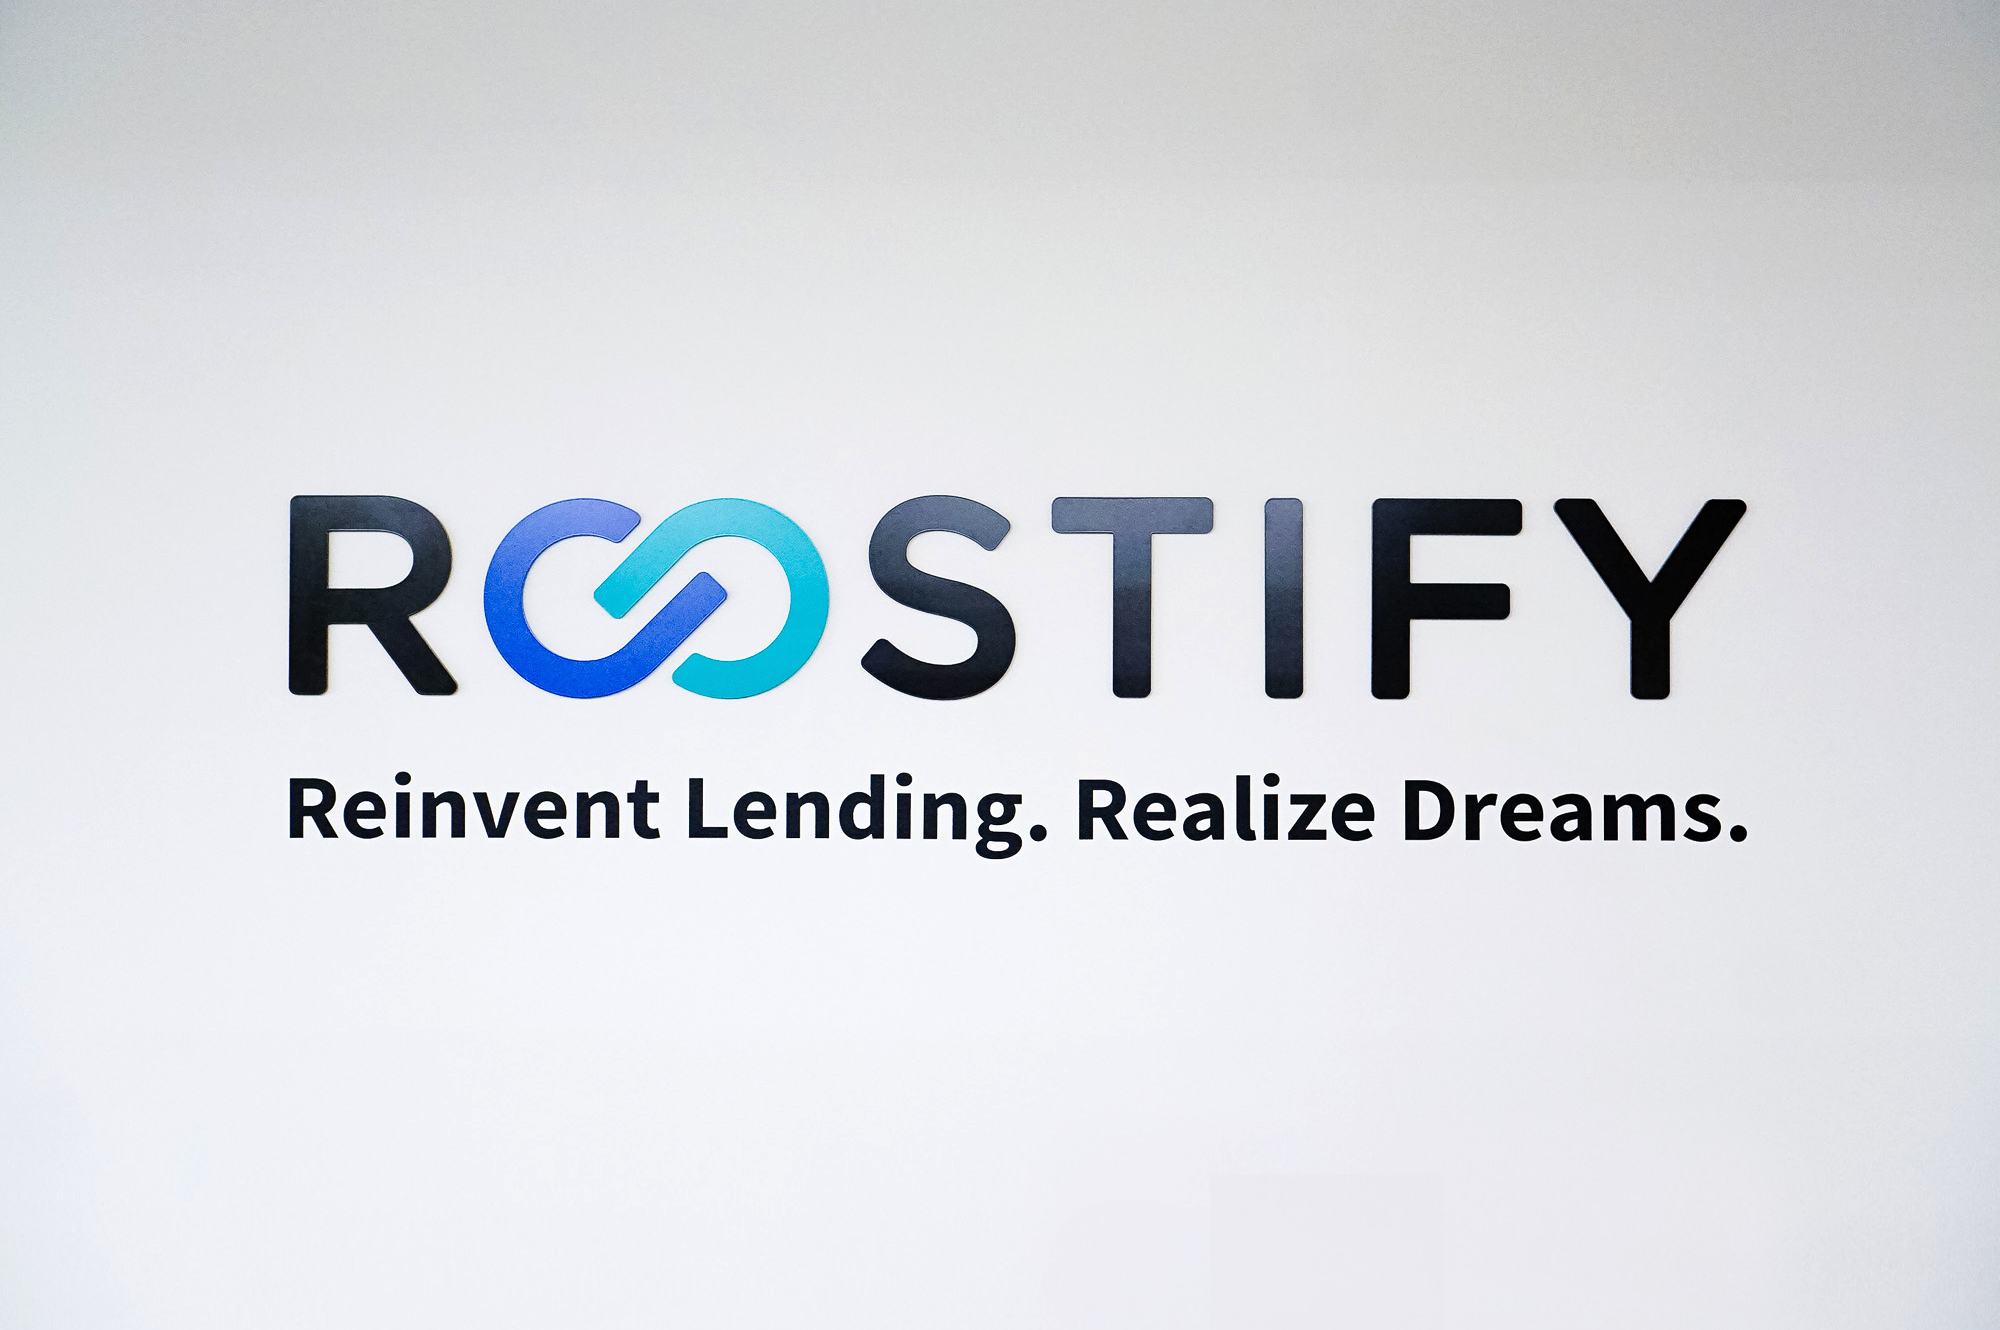 Dimensional, full color logo on white wall in lobby and elevator vestibule for the San Francisco office of Roostify, an integrated digital mortgage software platform.